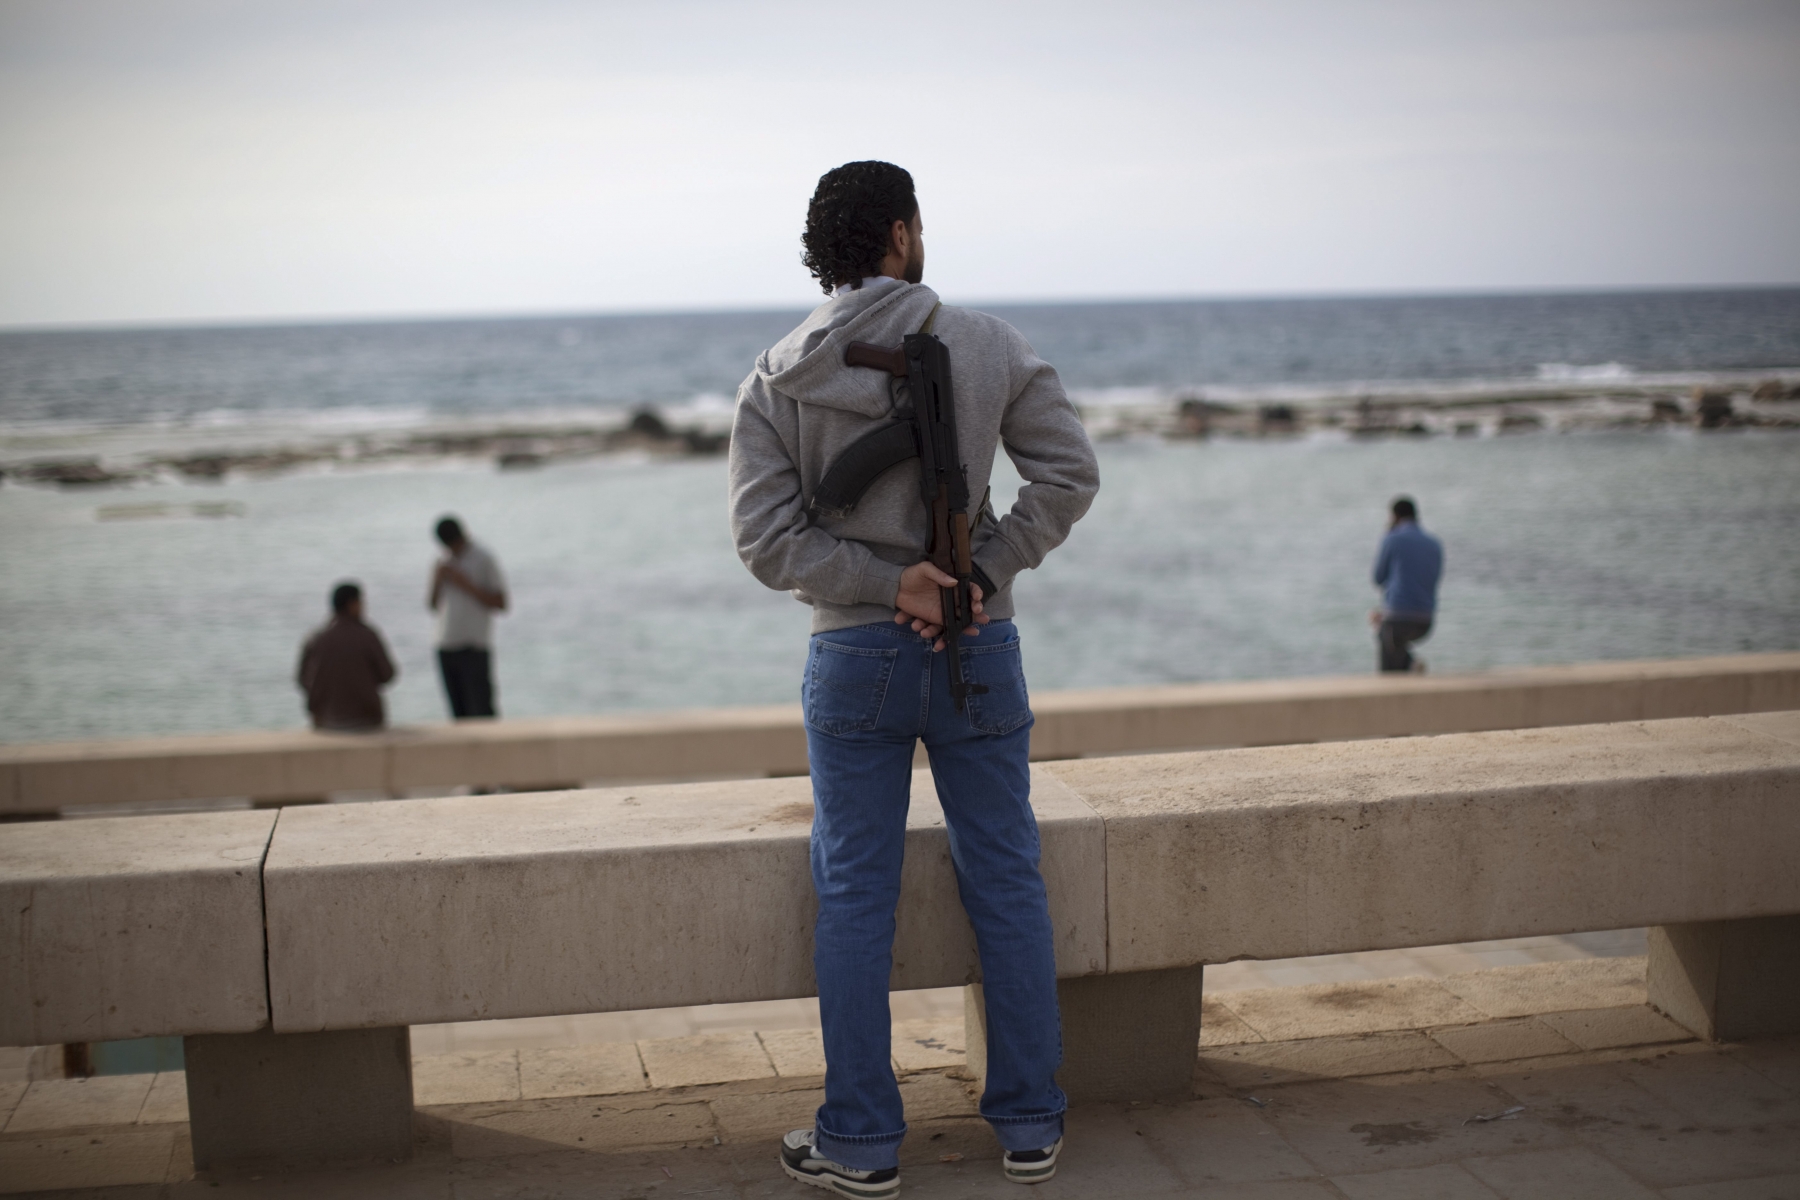 A rebel fighter looks out to the Mediterranean Sea from the seaside in Benghazi, Libya, Sunday, May 8, 2011.  (AP Photo/Rodrigo Abd)